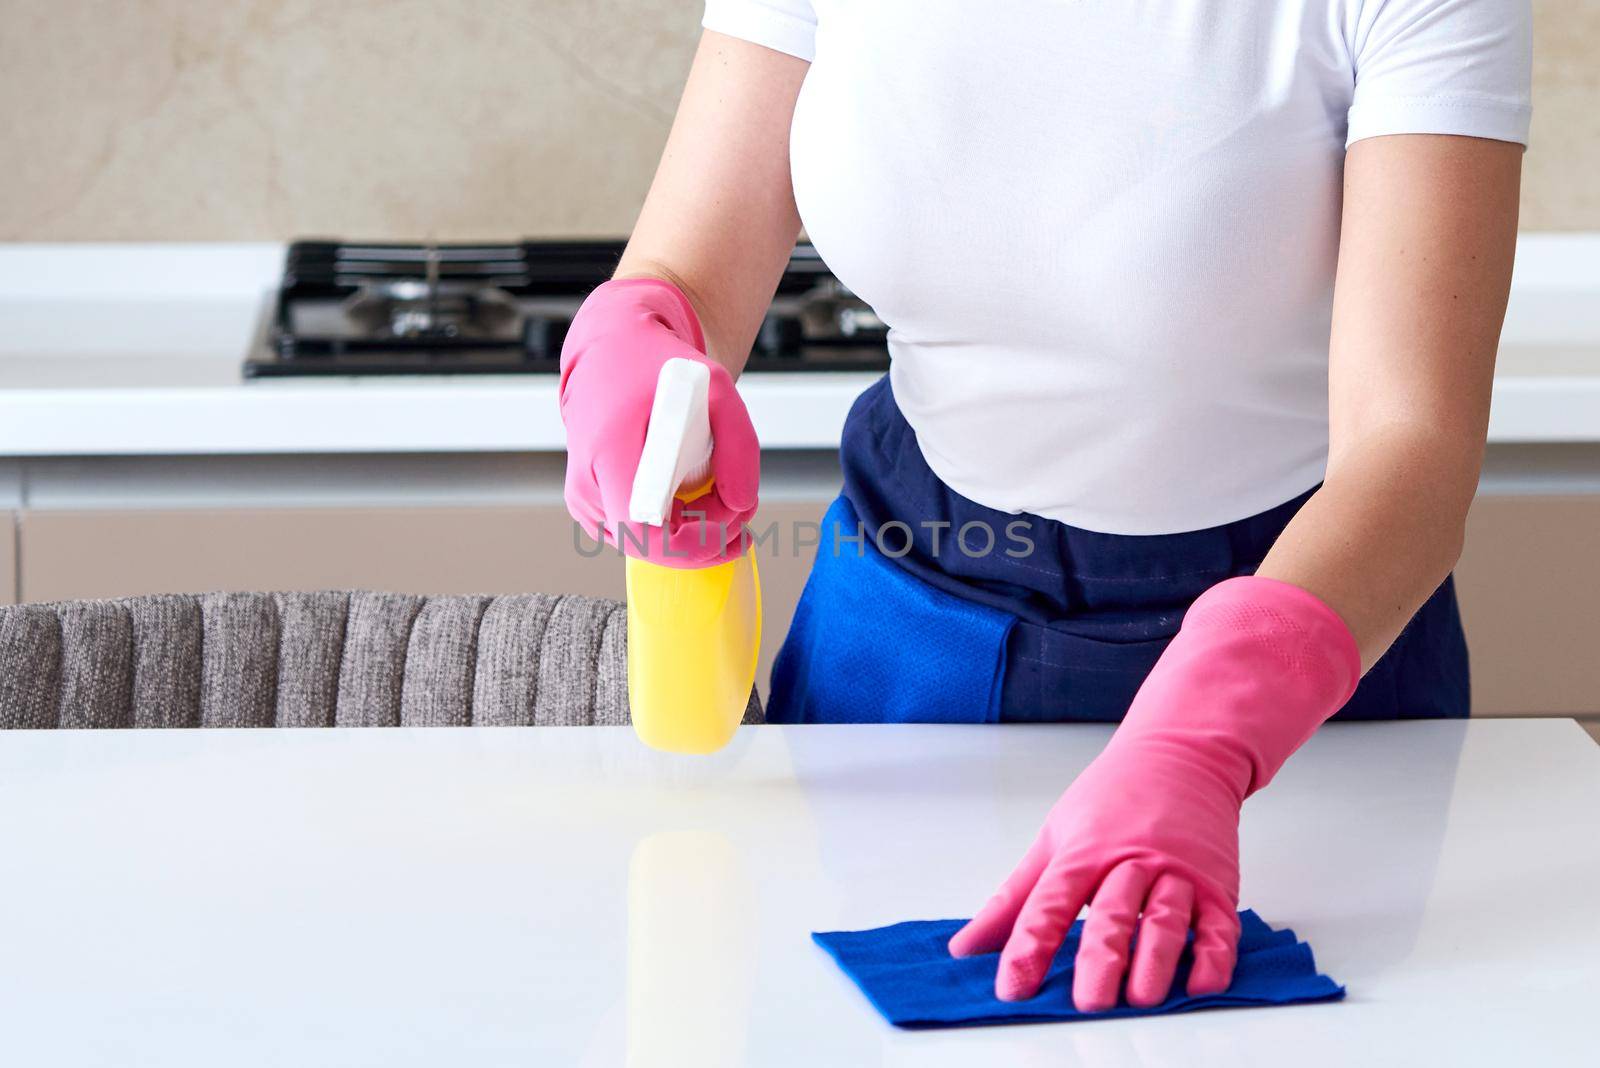 Woman wearing rubber gloves cleaning table with cloth. Disinfecting a kitchen table with bleach